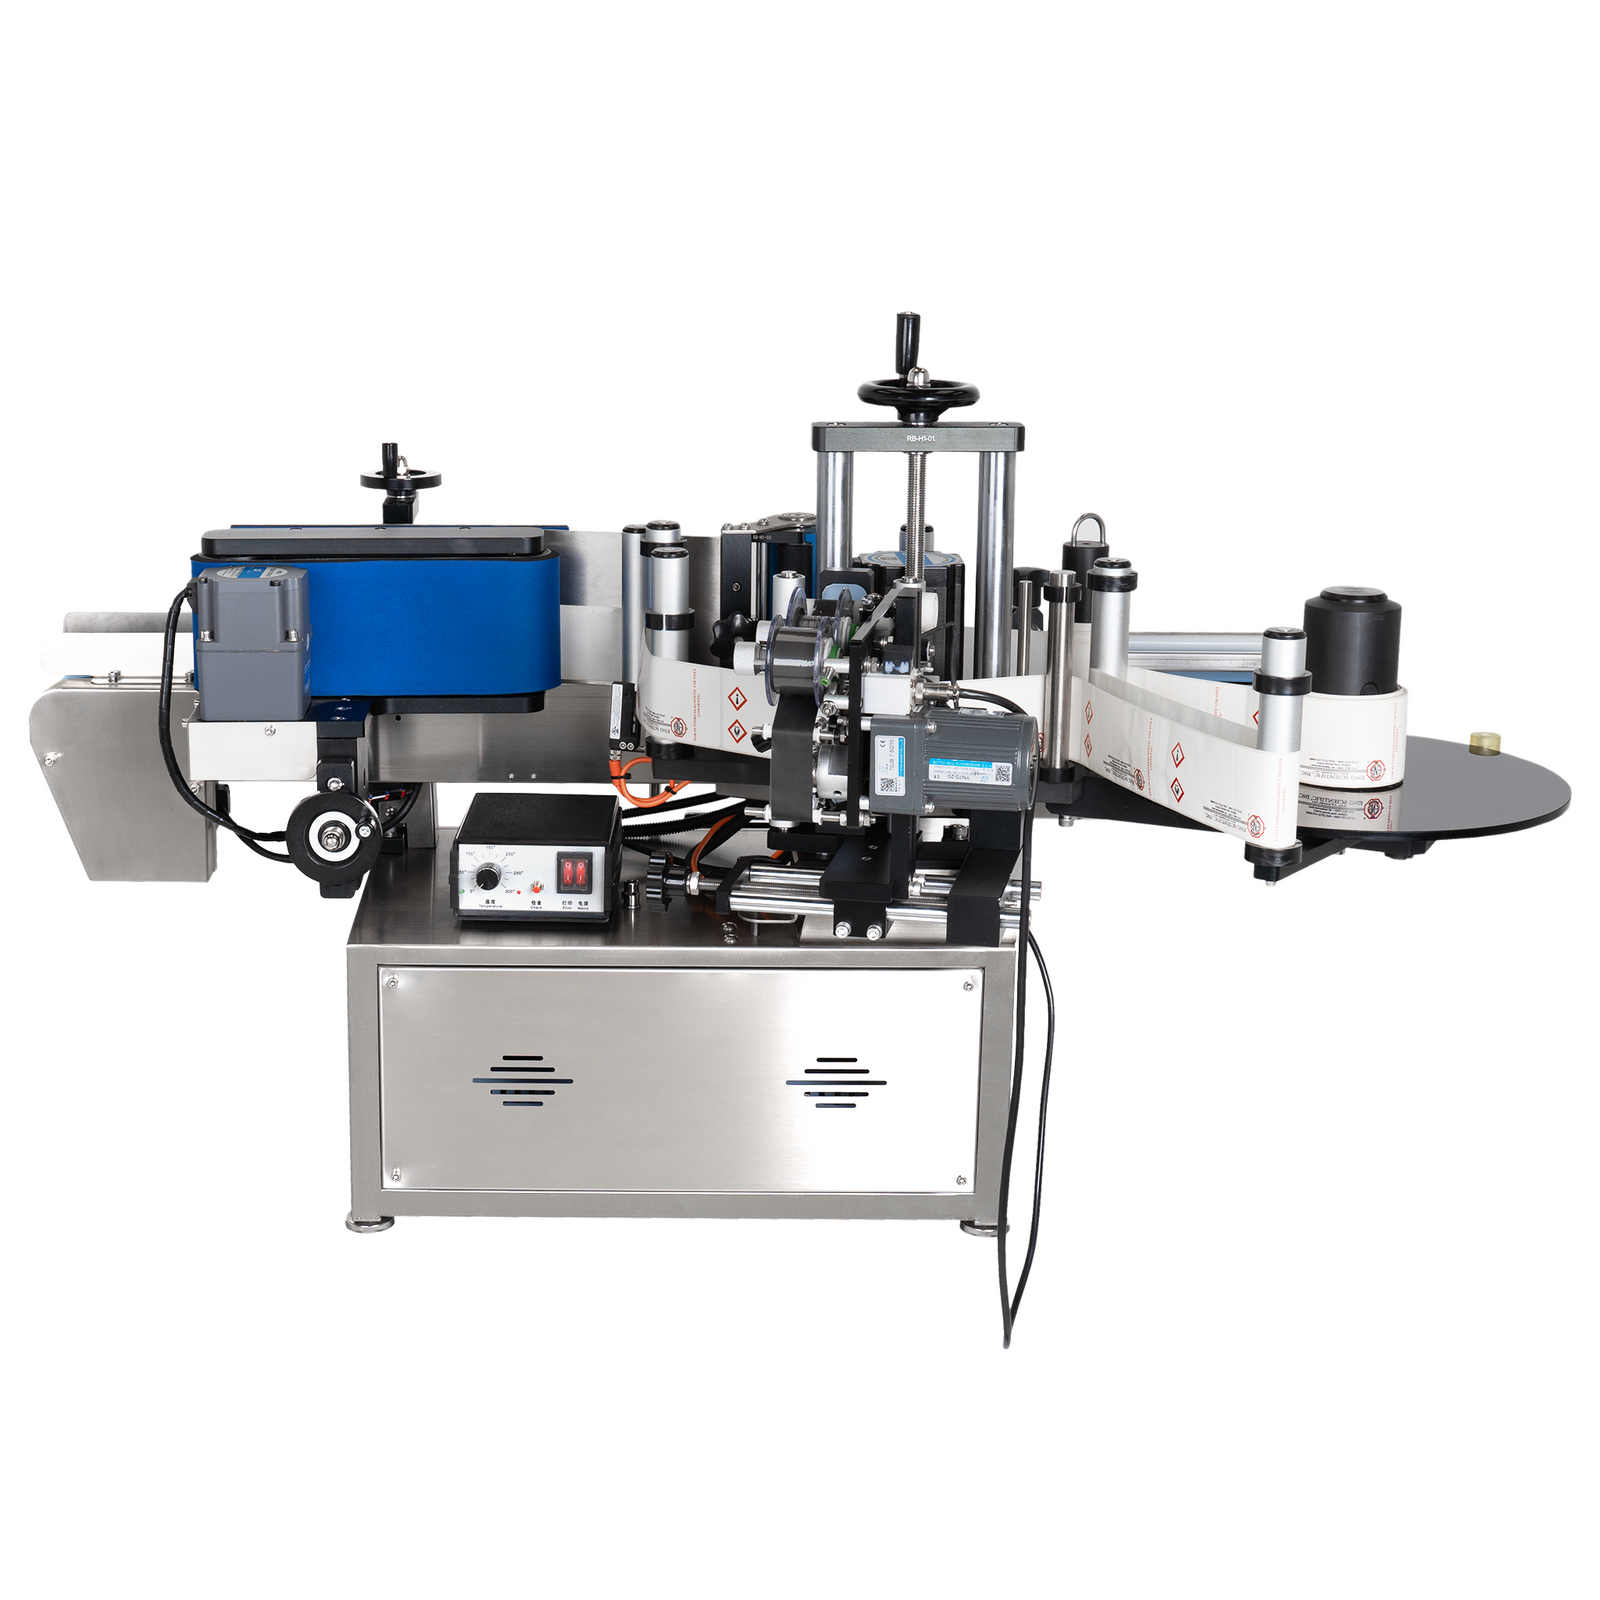 Automatic label applicator machine with integrated printer